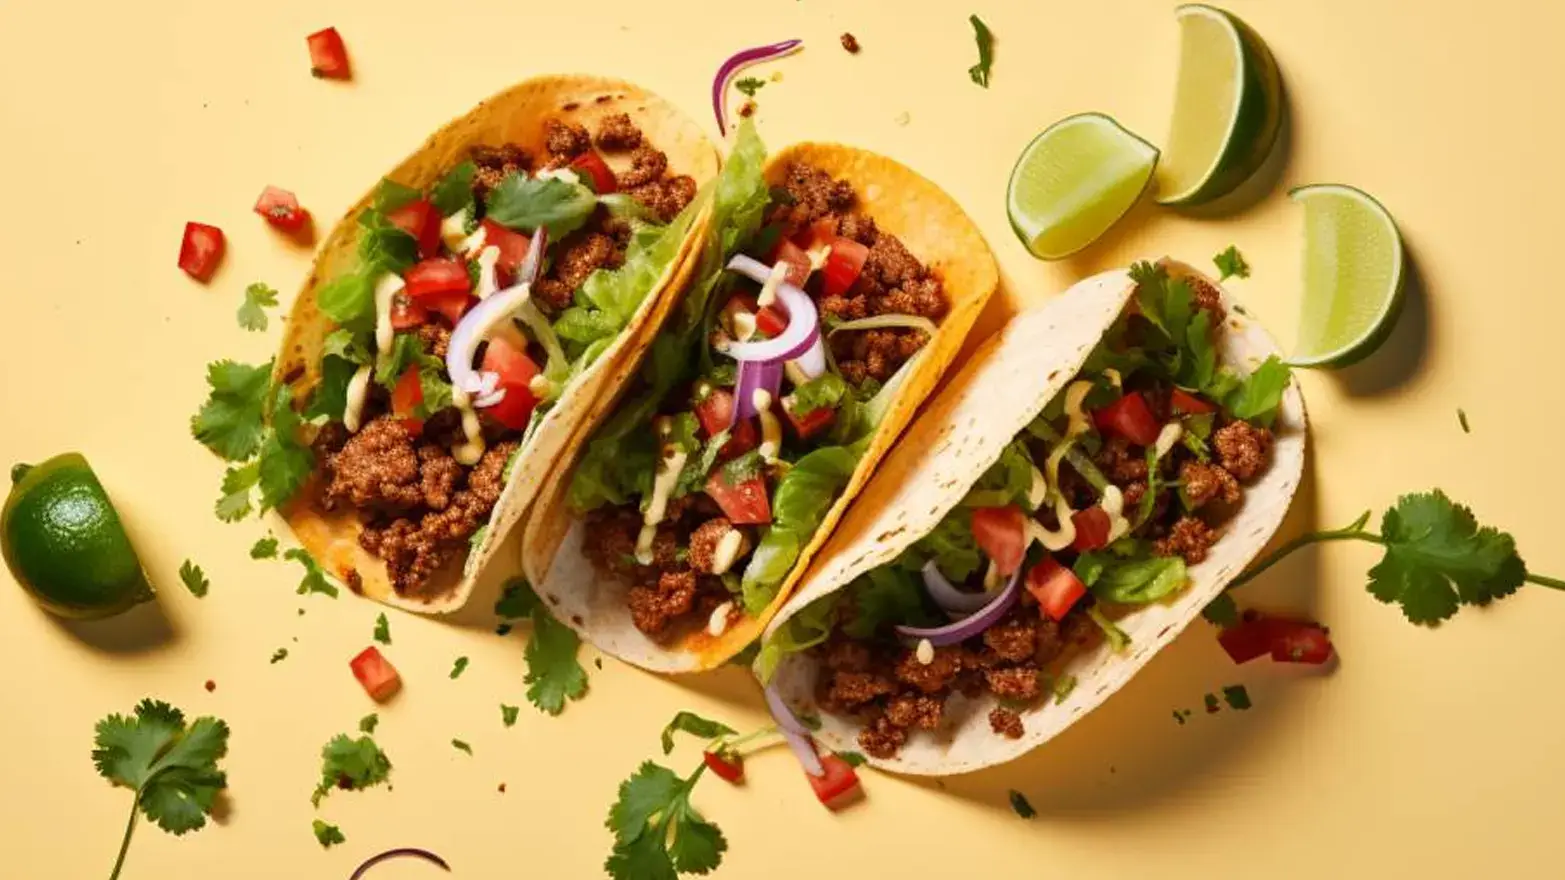 Build your own tacos for birthday dinner